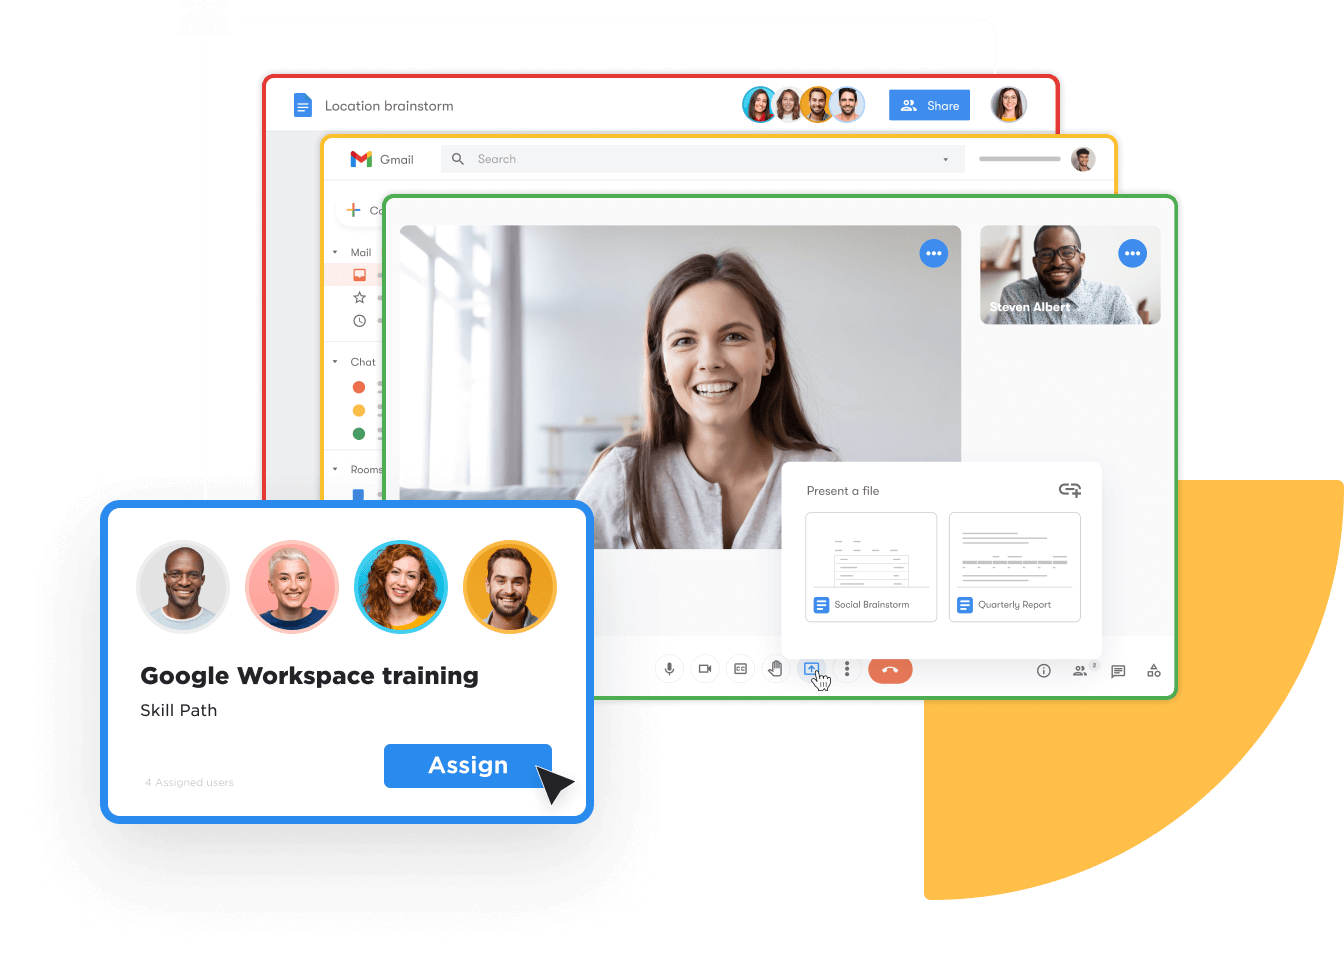 Communicate effective with Google Workspace